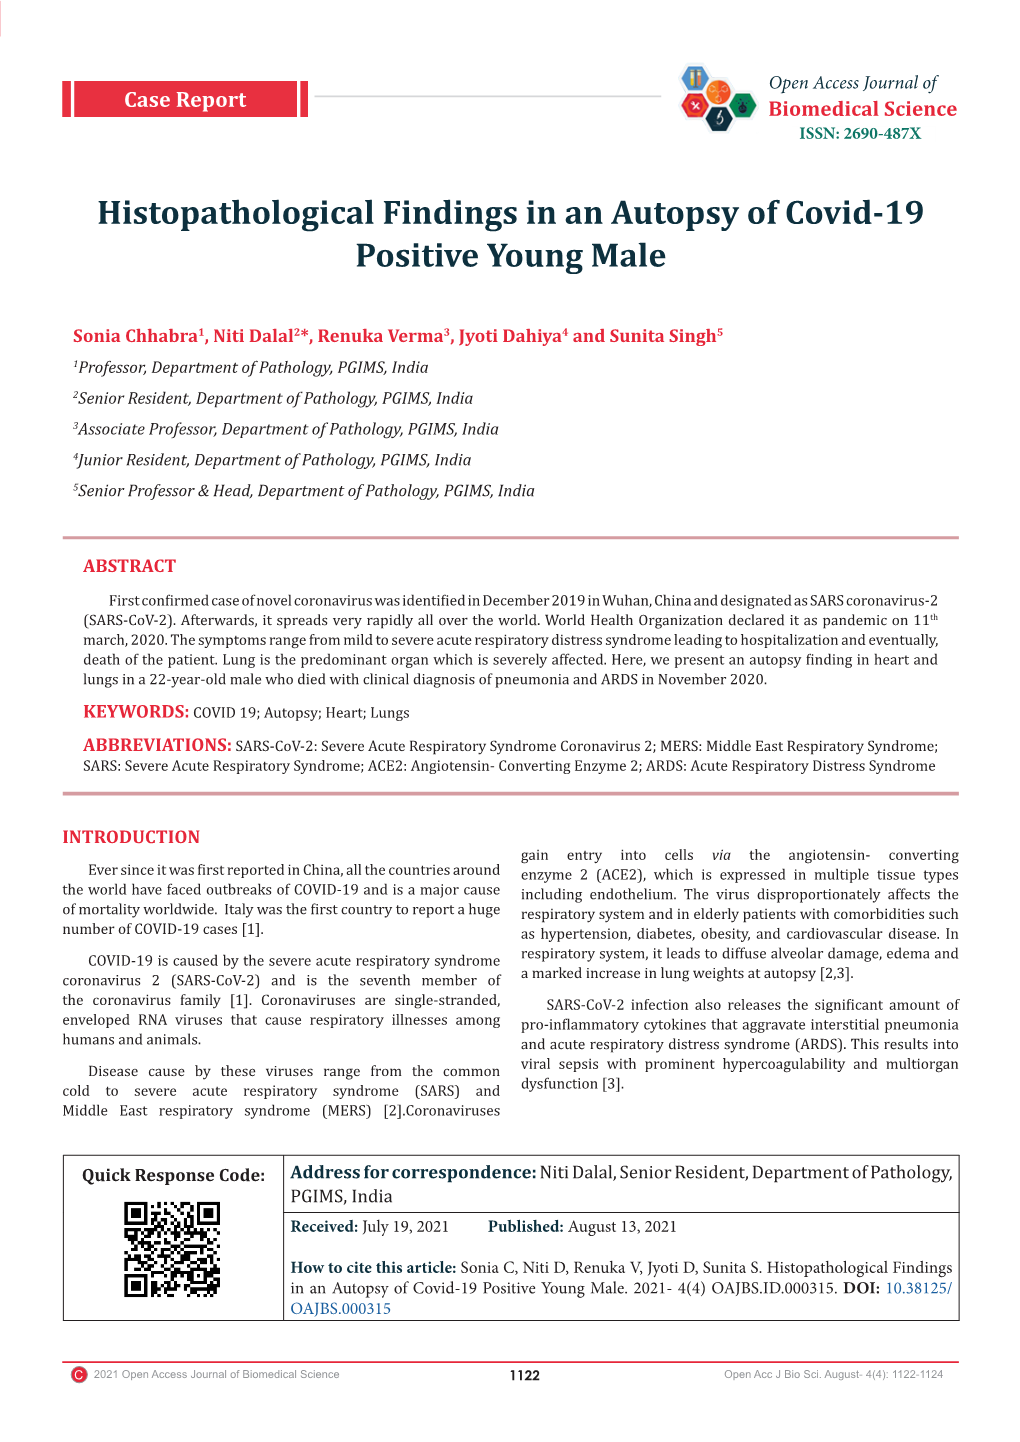 Histopathological Findings in an Autopsy of Covid-19 Positive Young Male